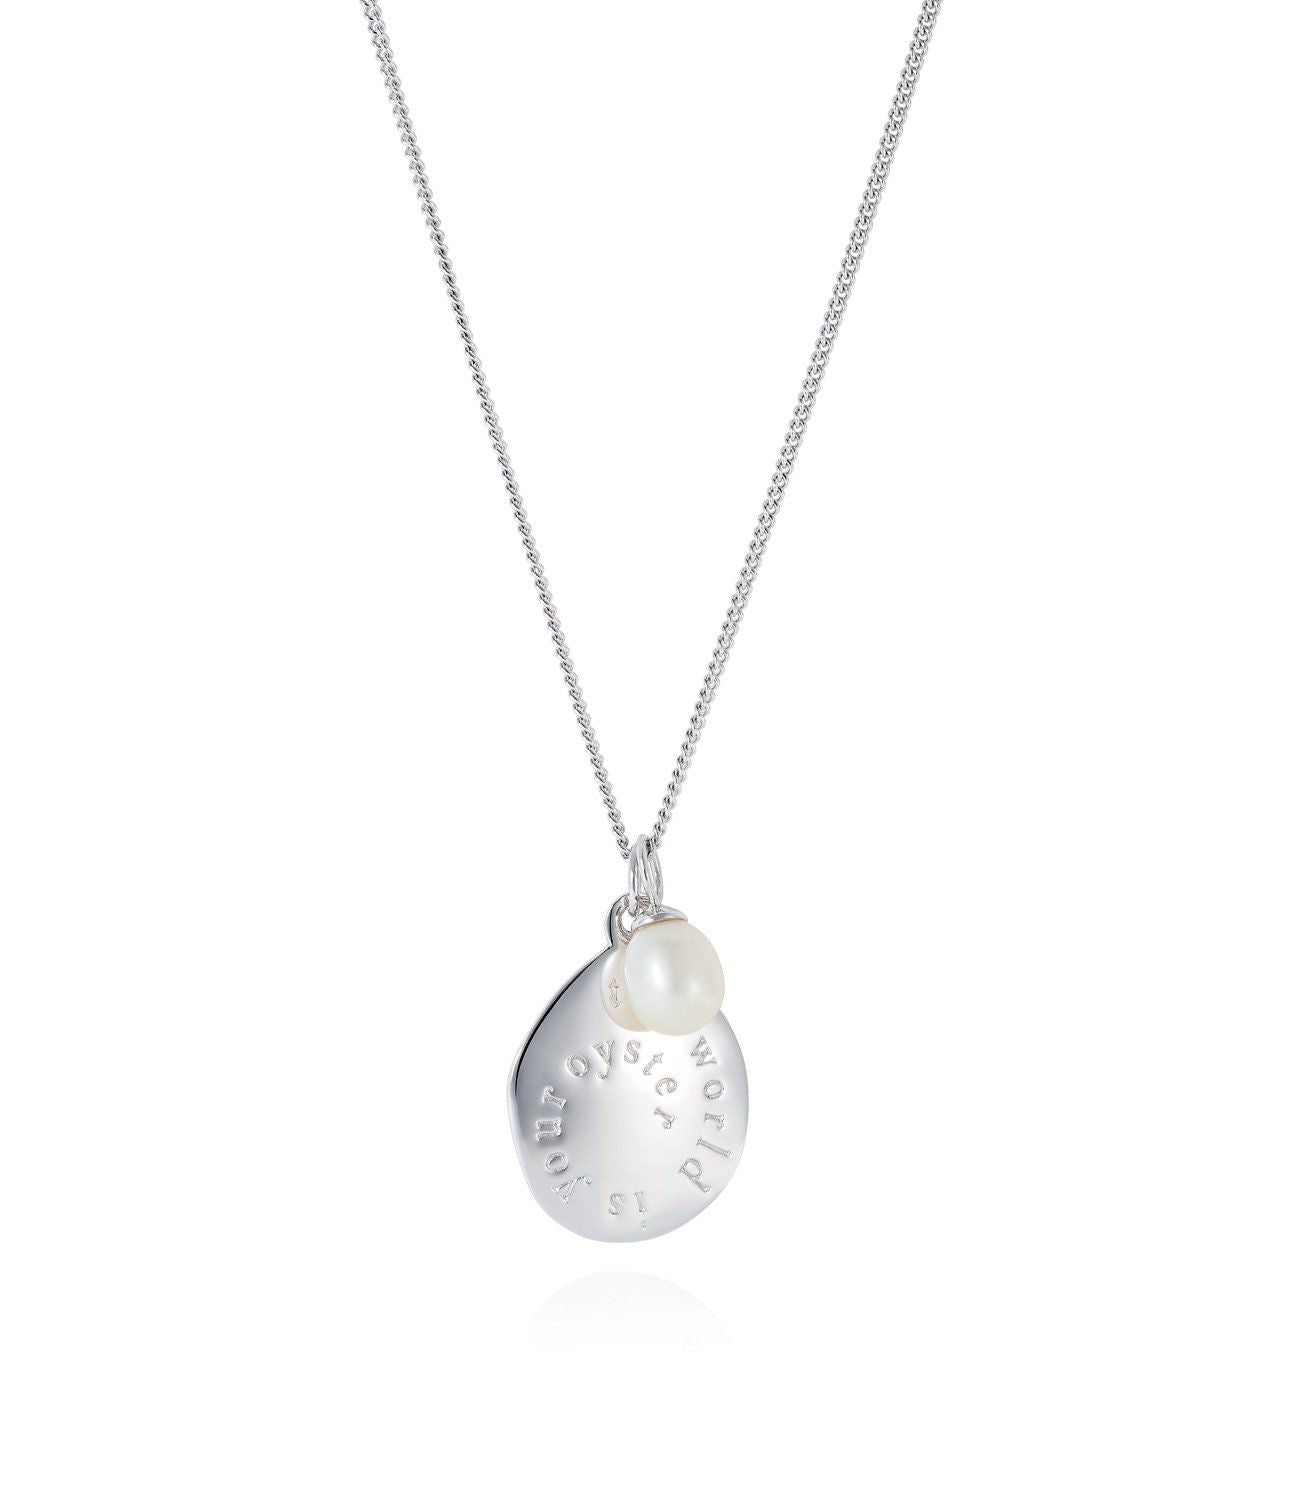 Sterling silver necklace with engraved charm and pearl drop